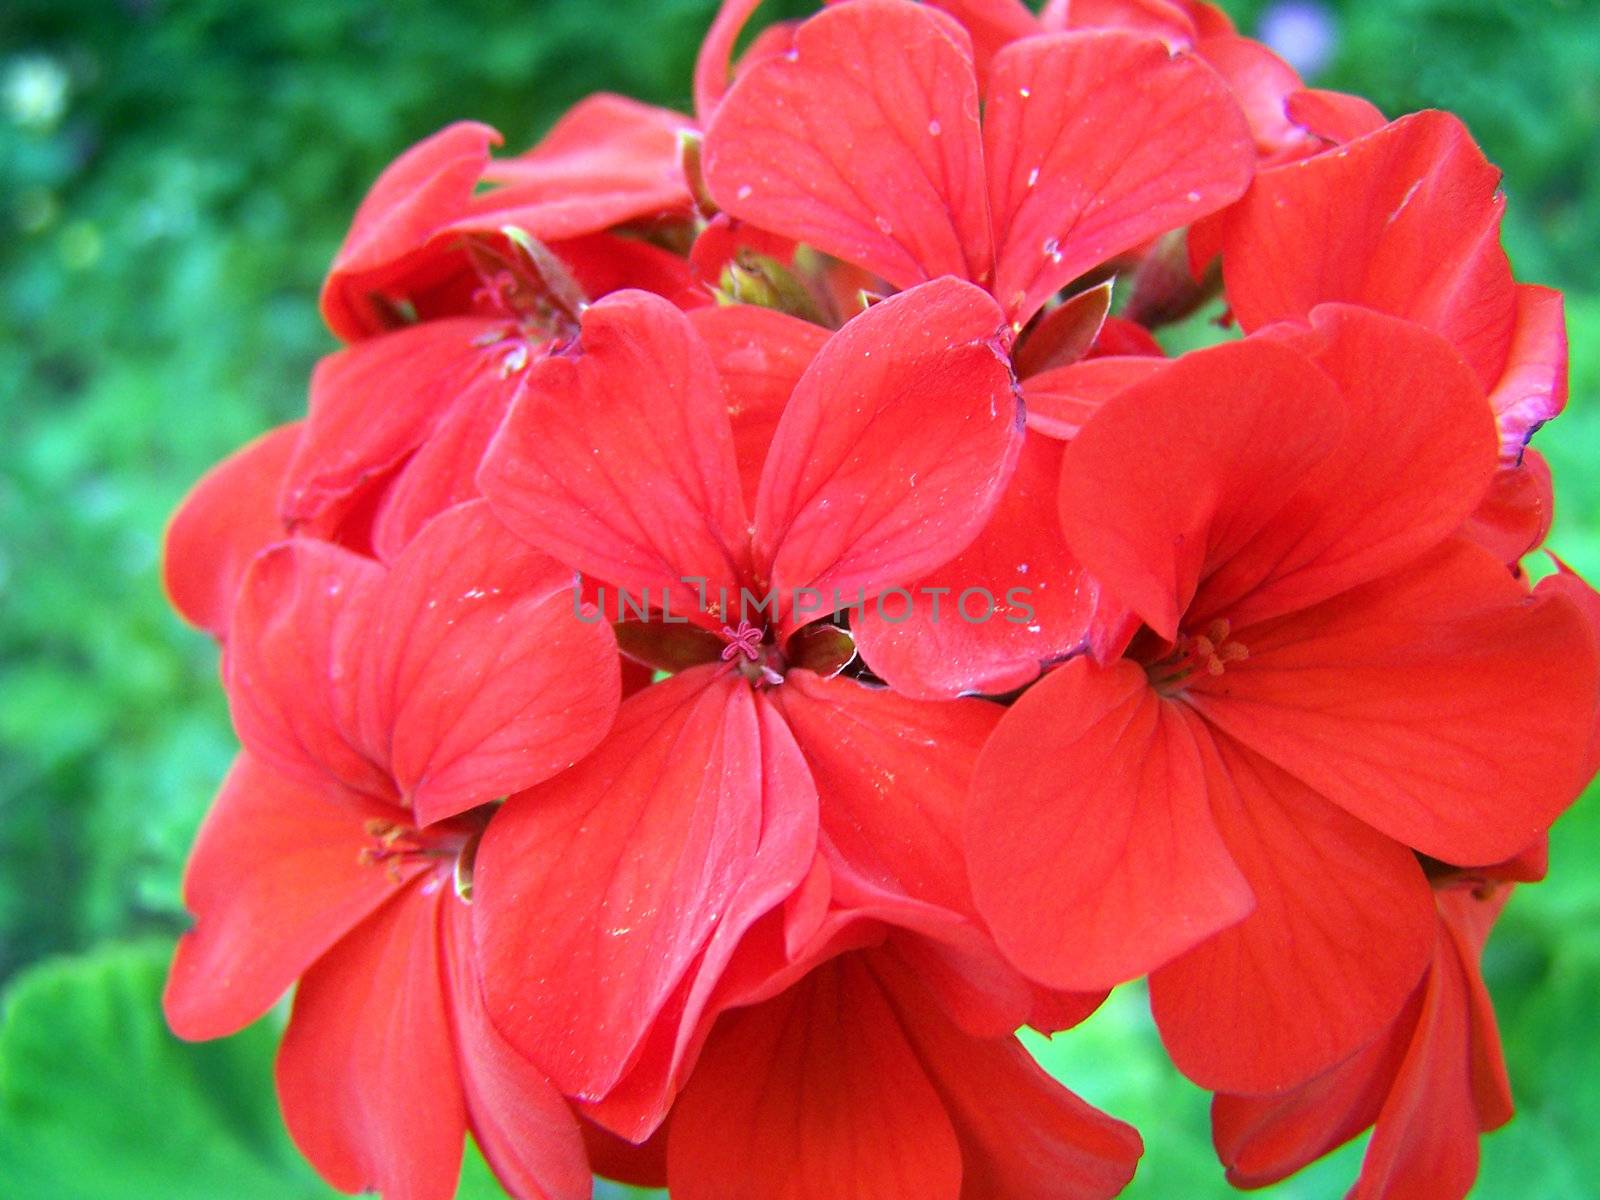 Close up of the red phlox blossom.